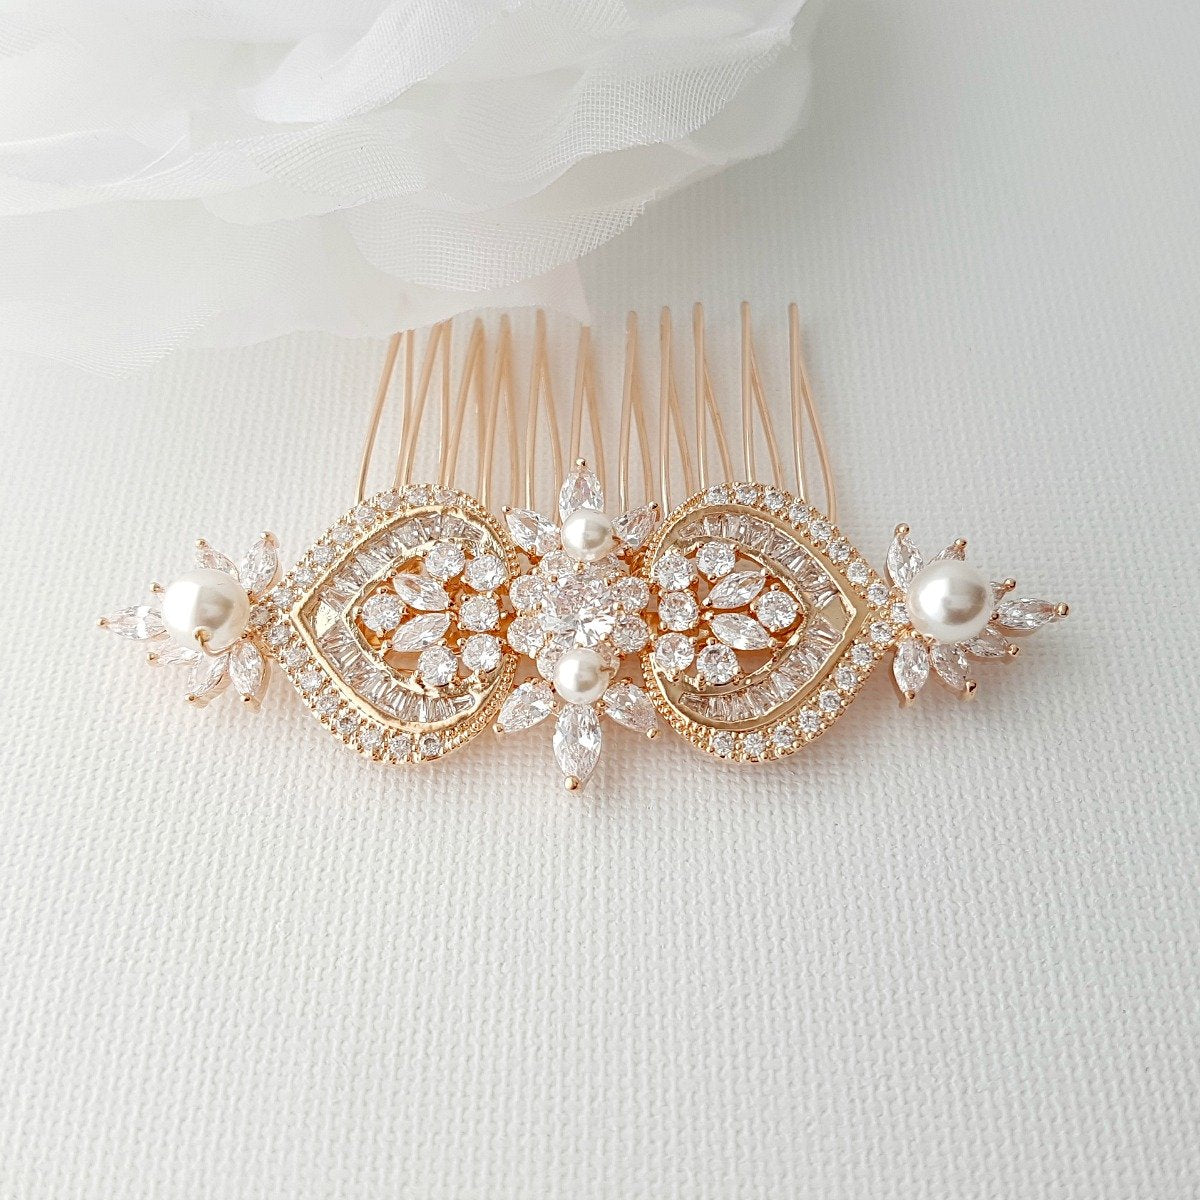 Gold Hair Comb for Brides-Rosa